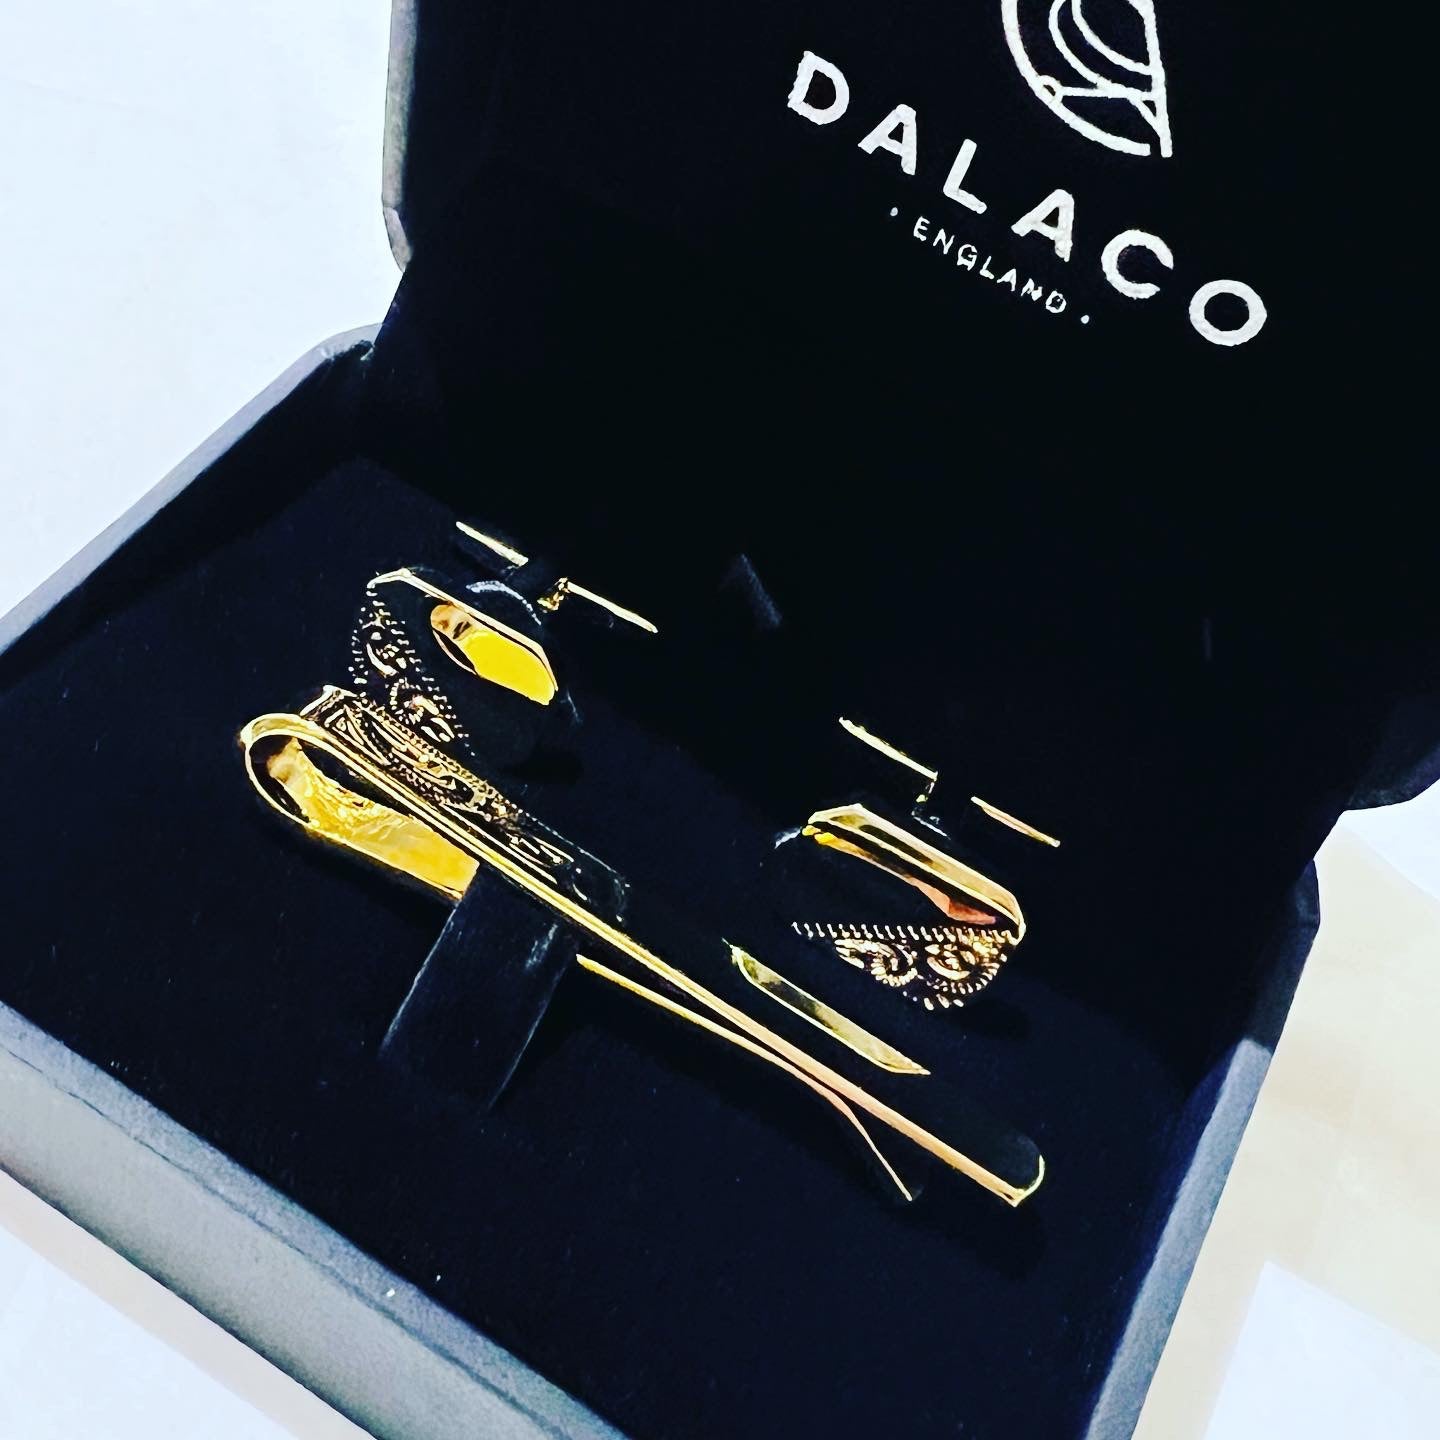 Gold Plated Cufflink and Tie Slide Set